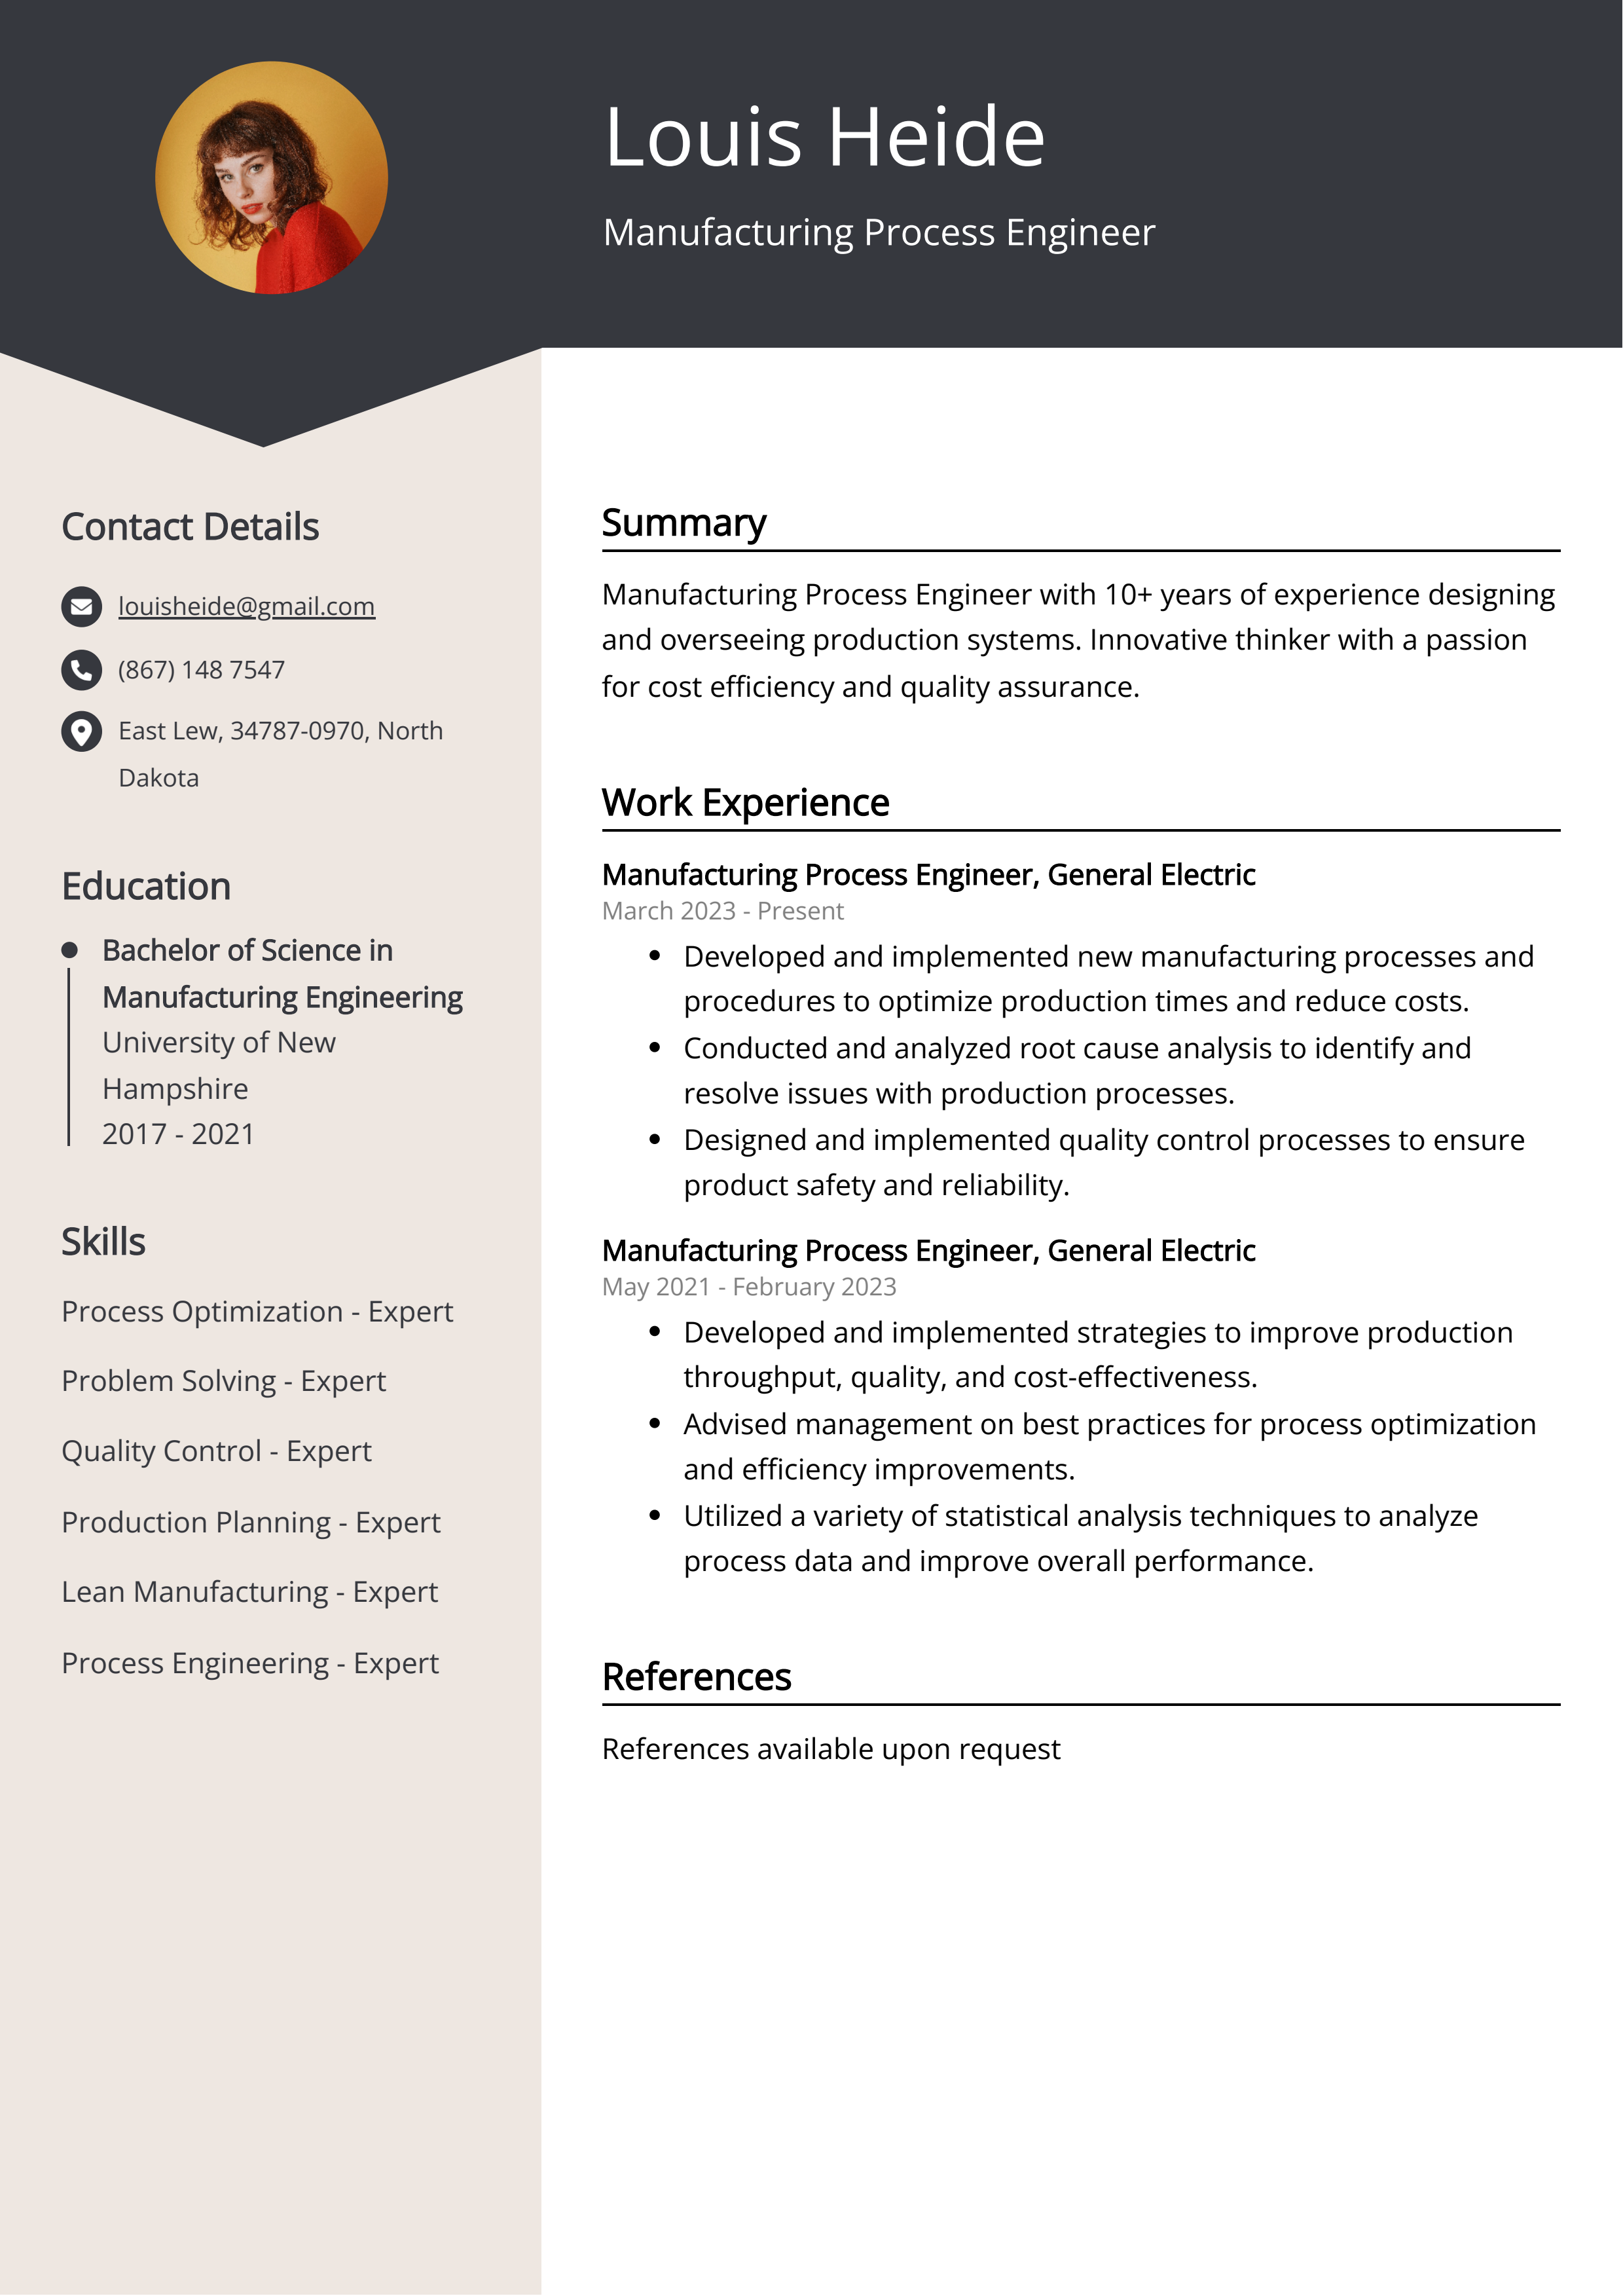 Manufacturing Process Engineer CV Example